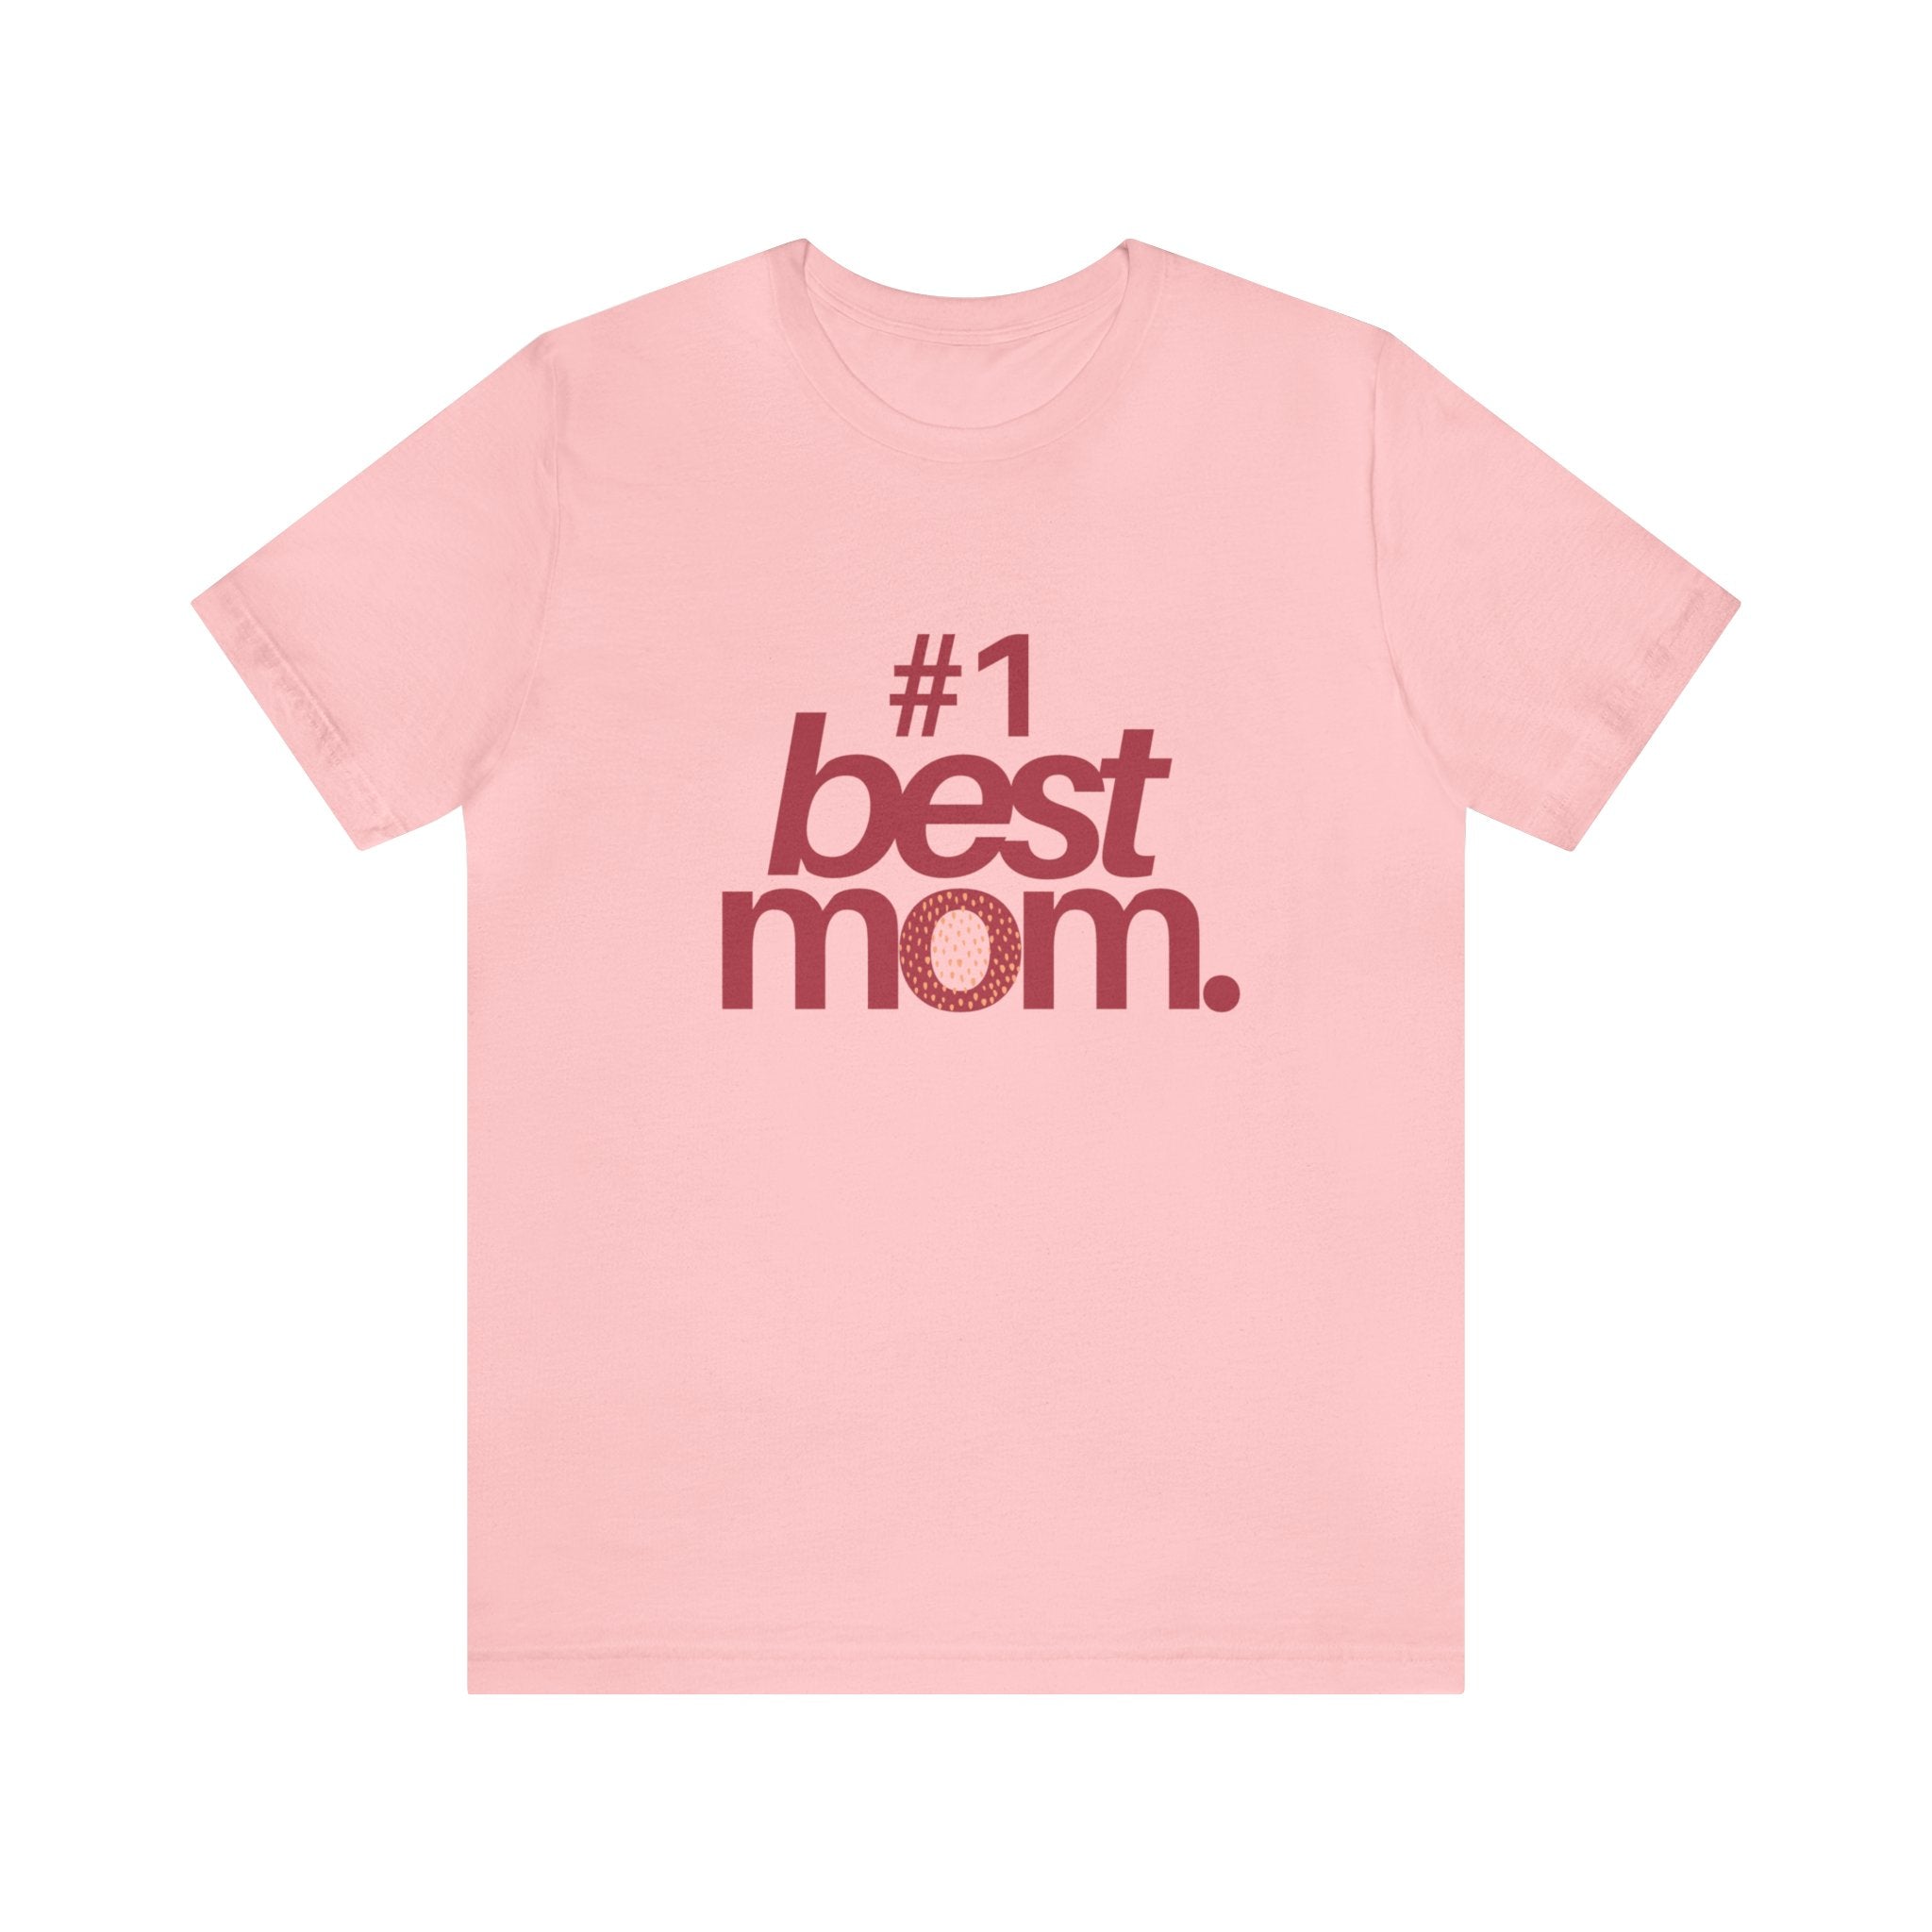 https://creationsbychrisandcarlos.store/products/1-best-mom-unisex-jersey-short-sleeve-tee